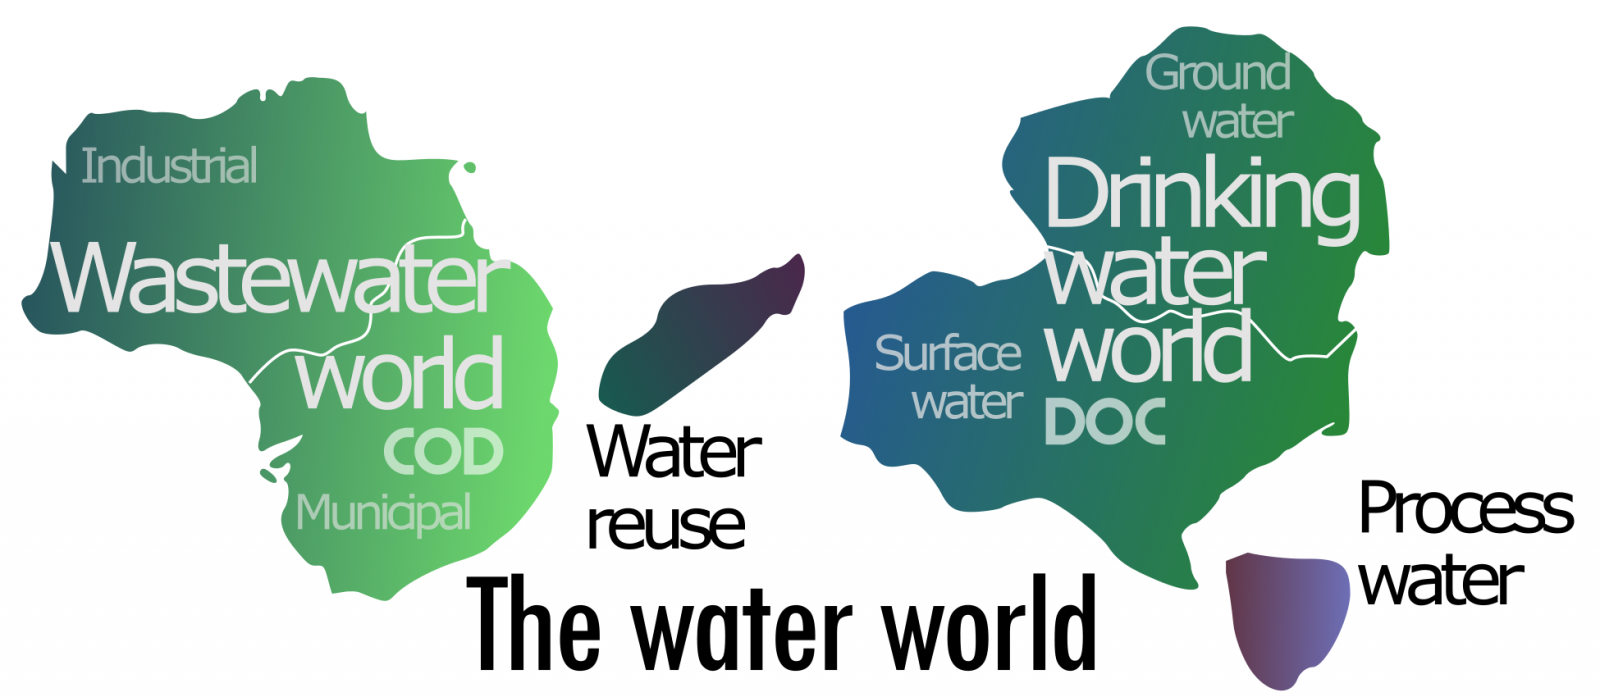 World map showing drinking water, process water, water reuse and wastewater